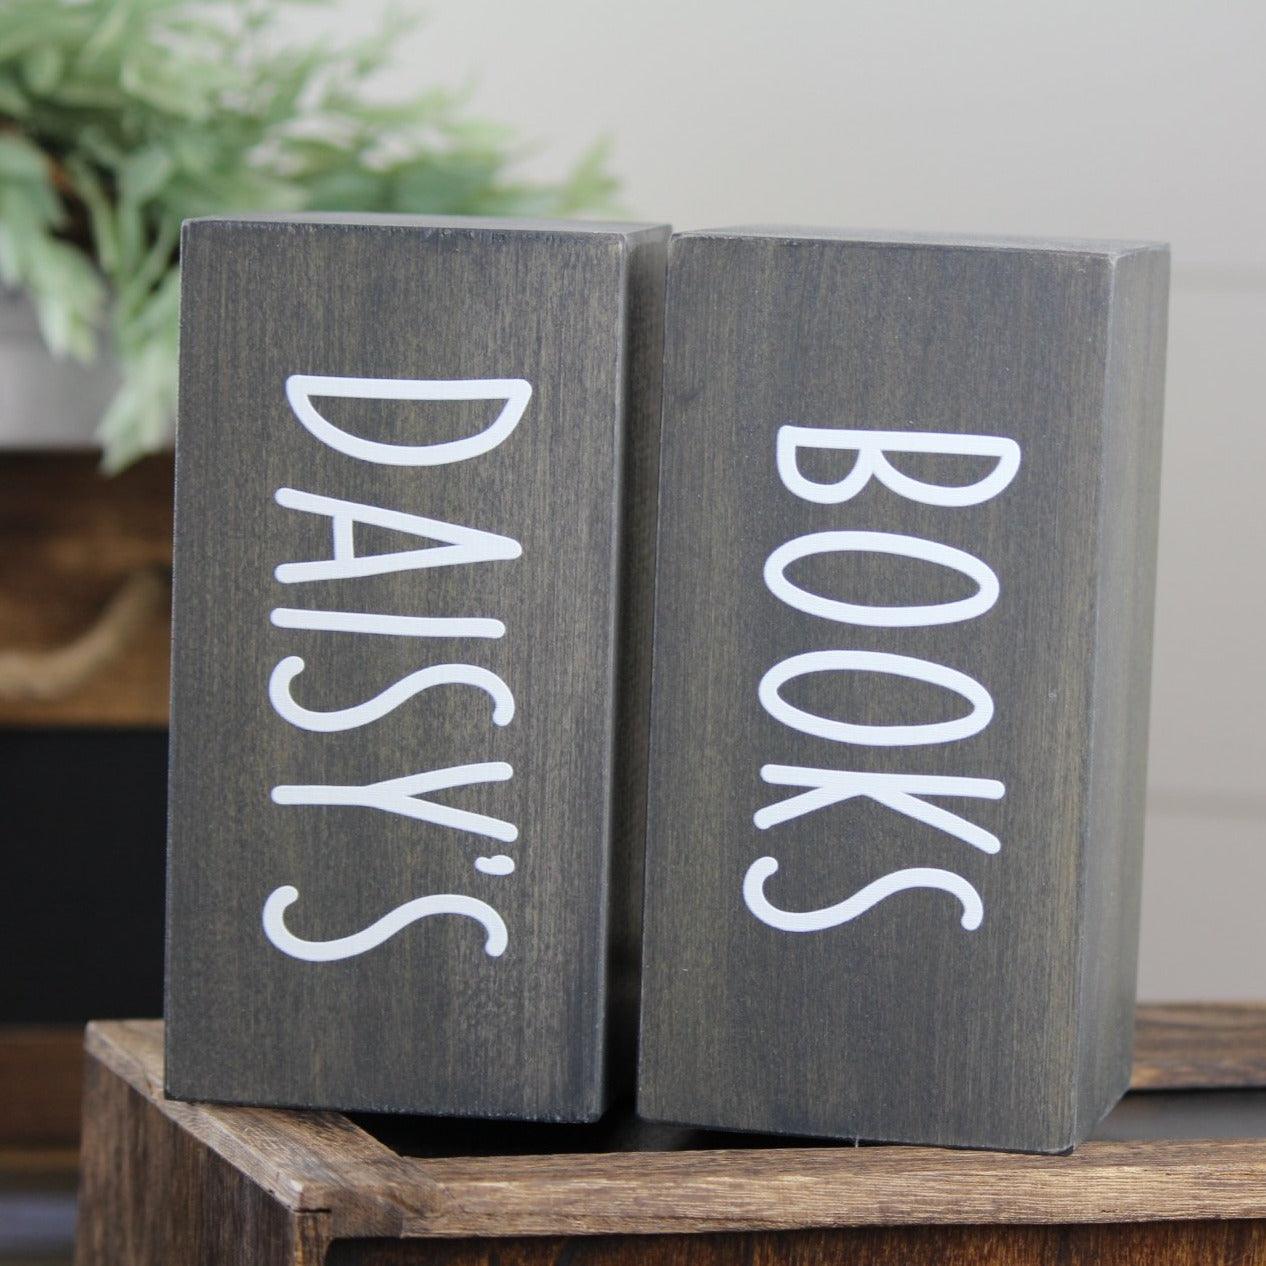 Pair of personalized wooden rectangular bookends in walnut